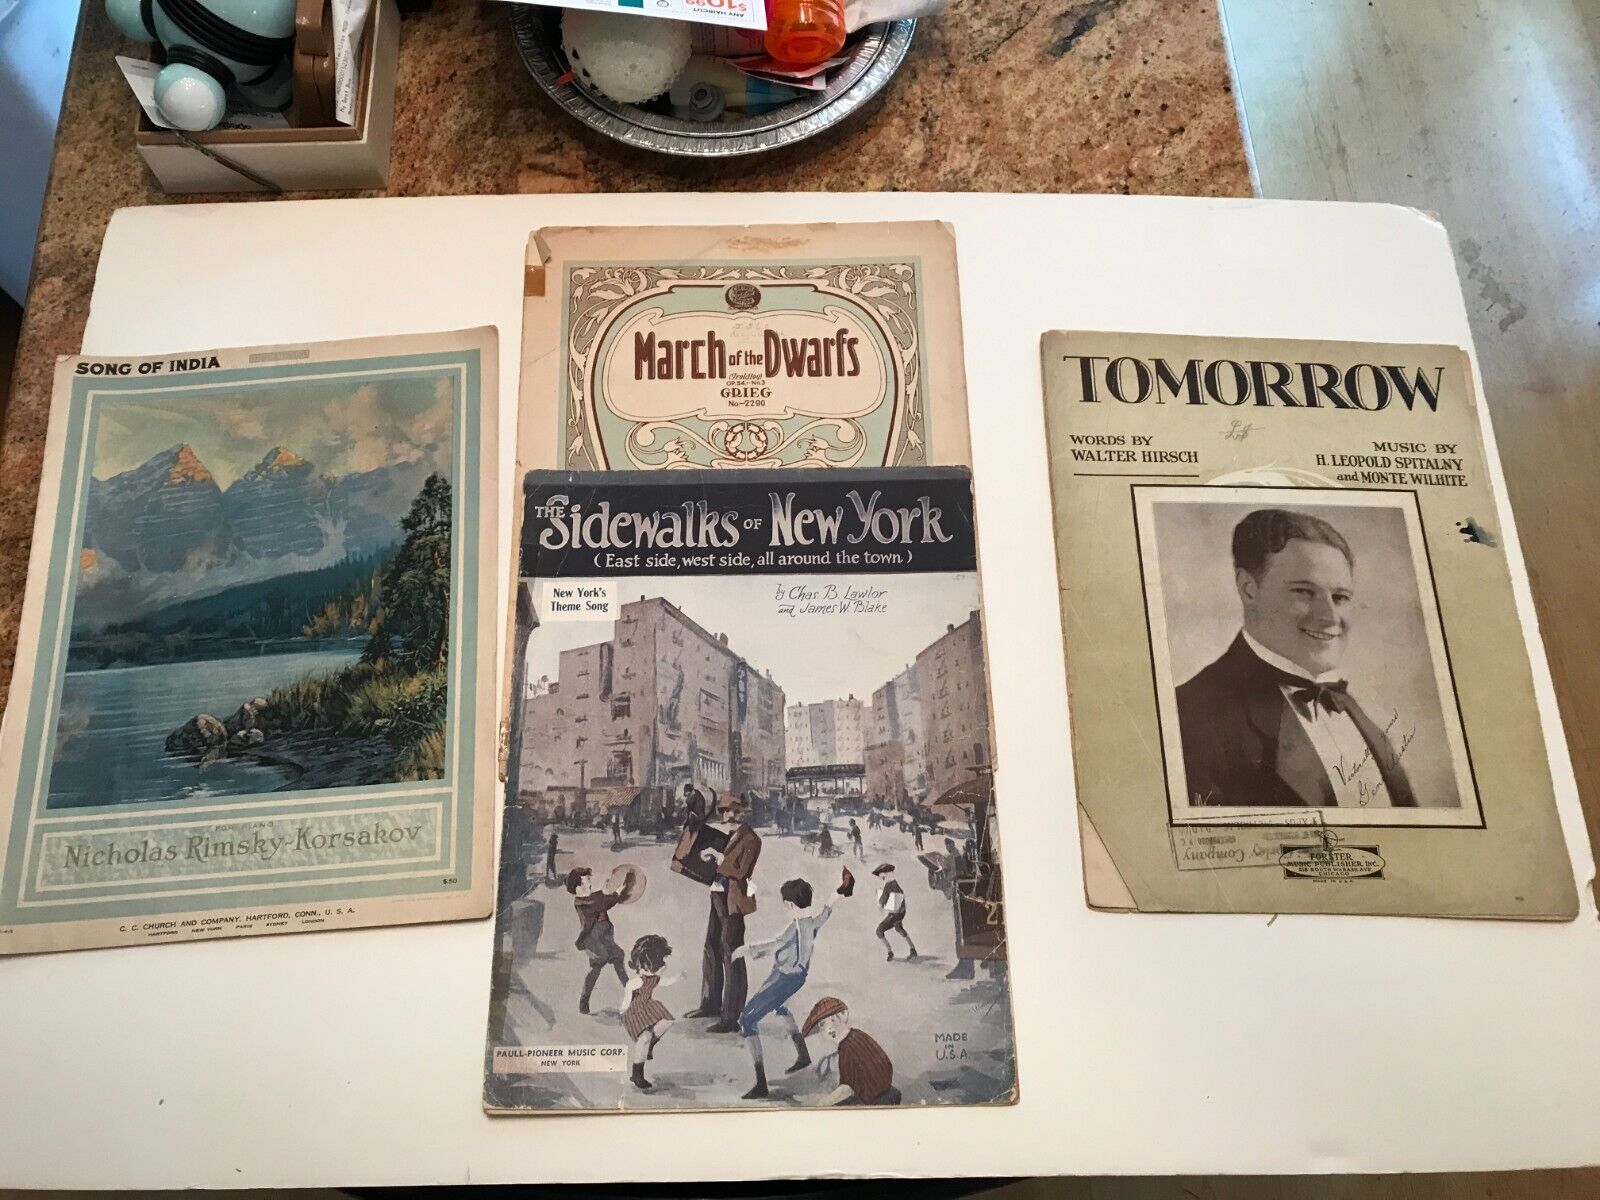 Vintage Sheet Music Lot of 4 items: See Pictures and Description for titles.